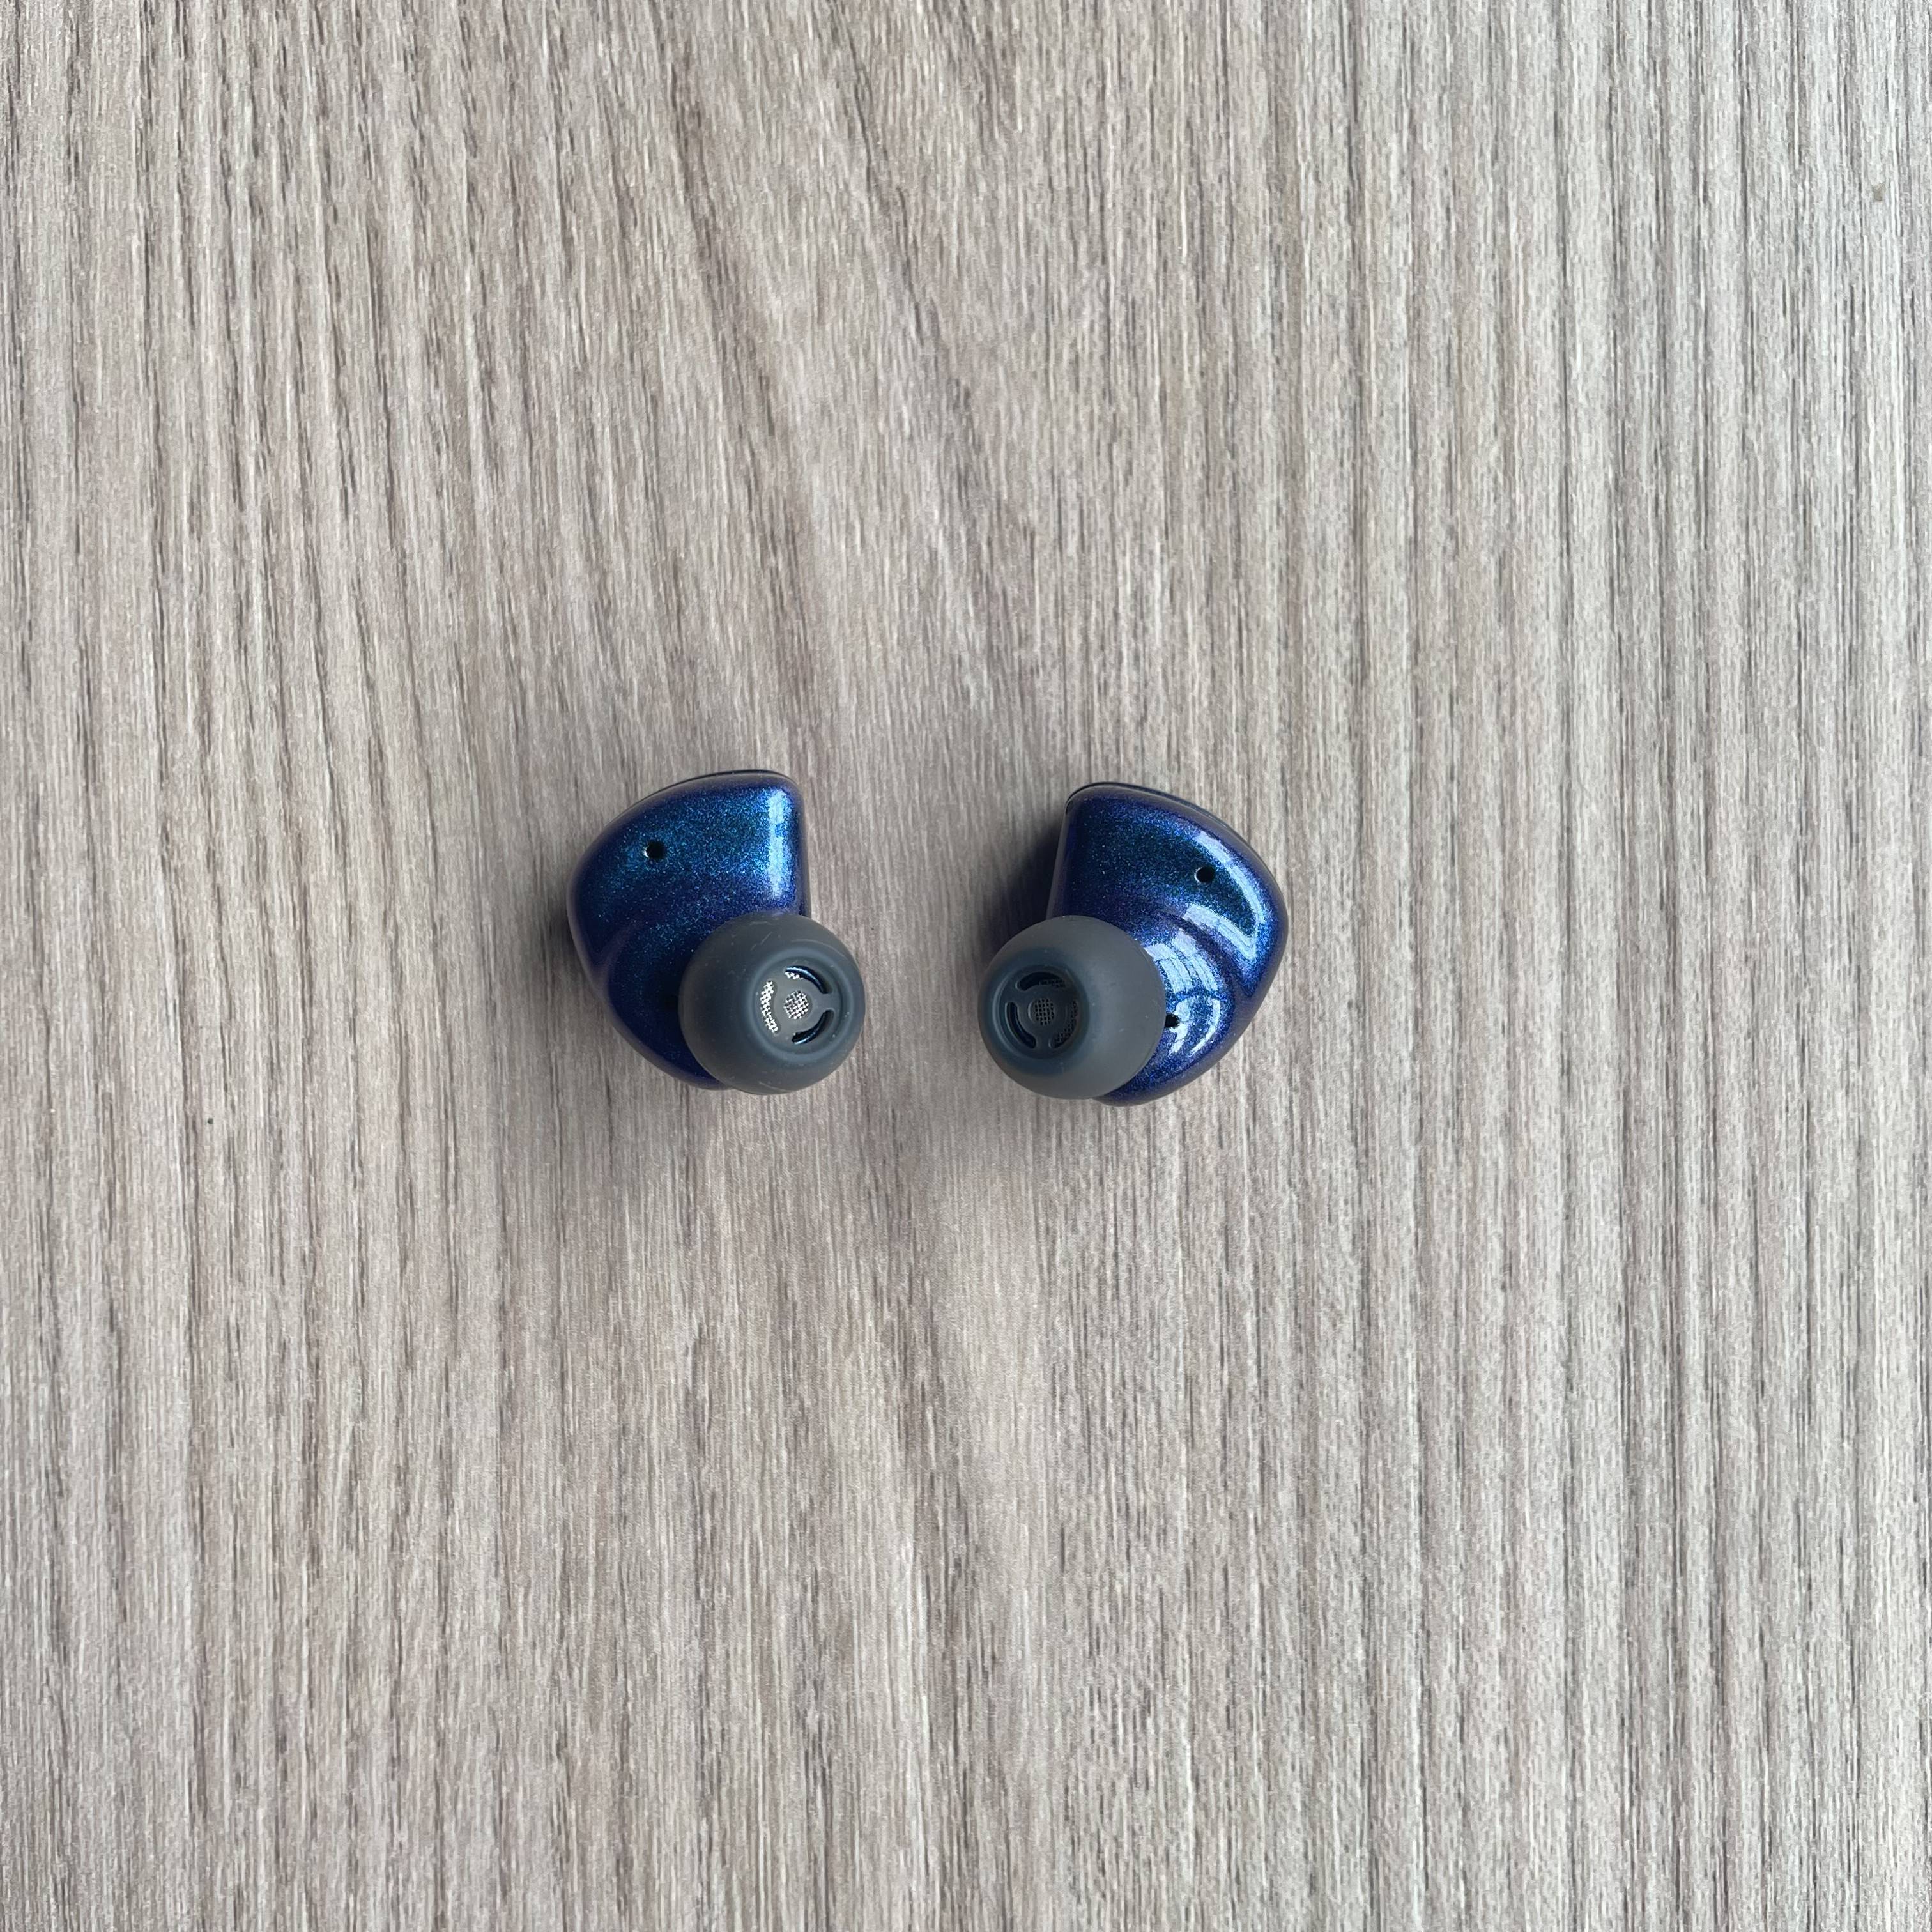 1MORE Silicone Eartips - 5 Pair